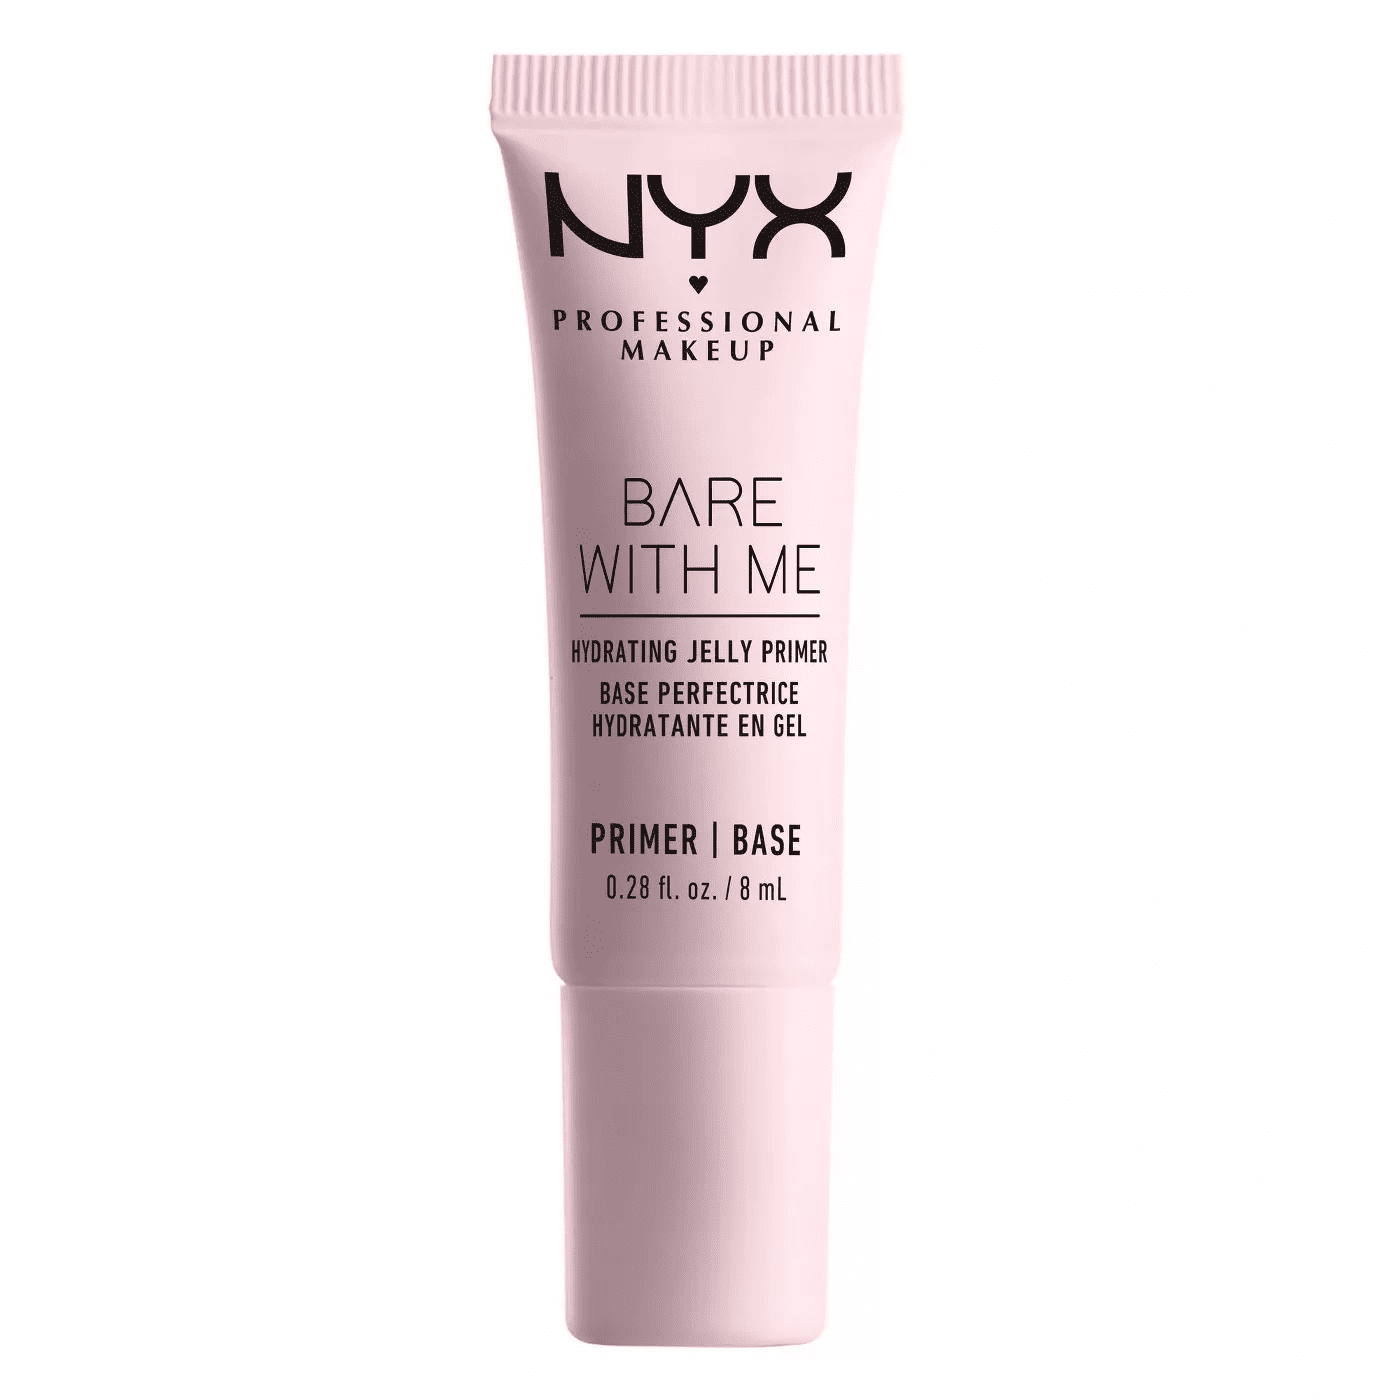 Me 0.27 Jelly oz fl Gripping Makeup with Professional Primer Bare NYX - Mini-